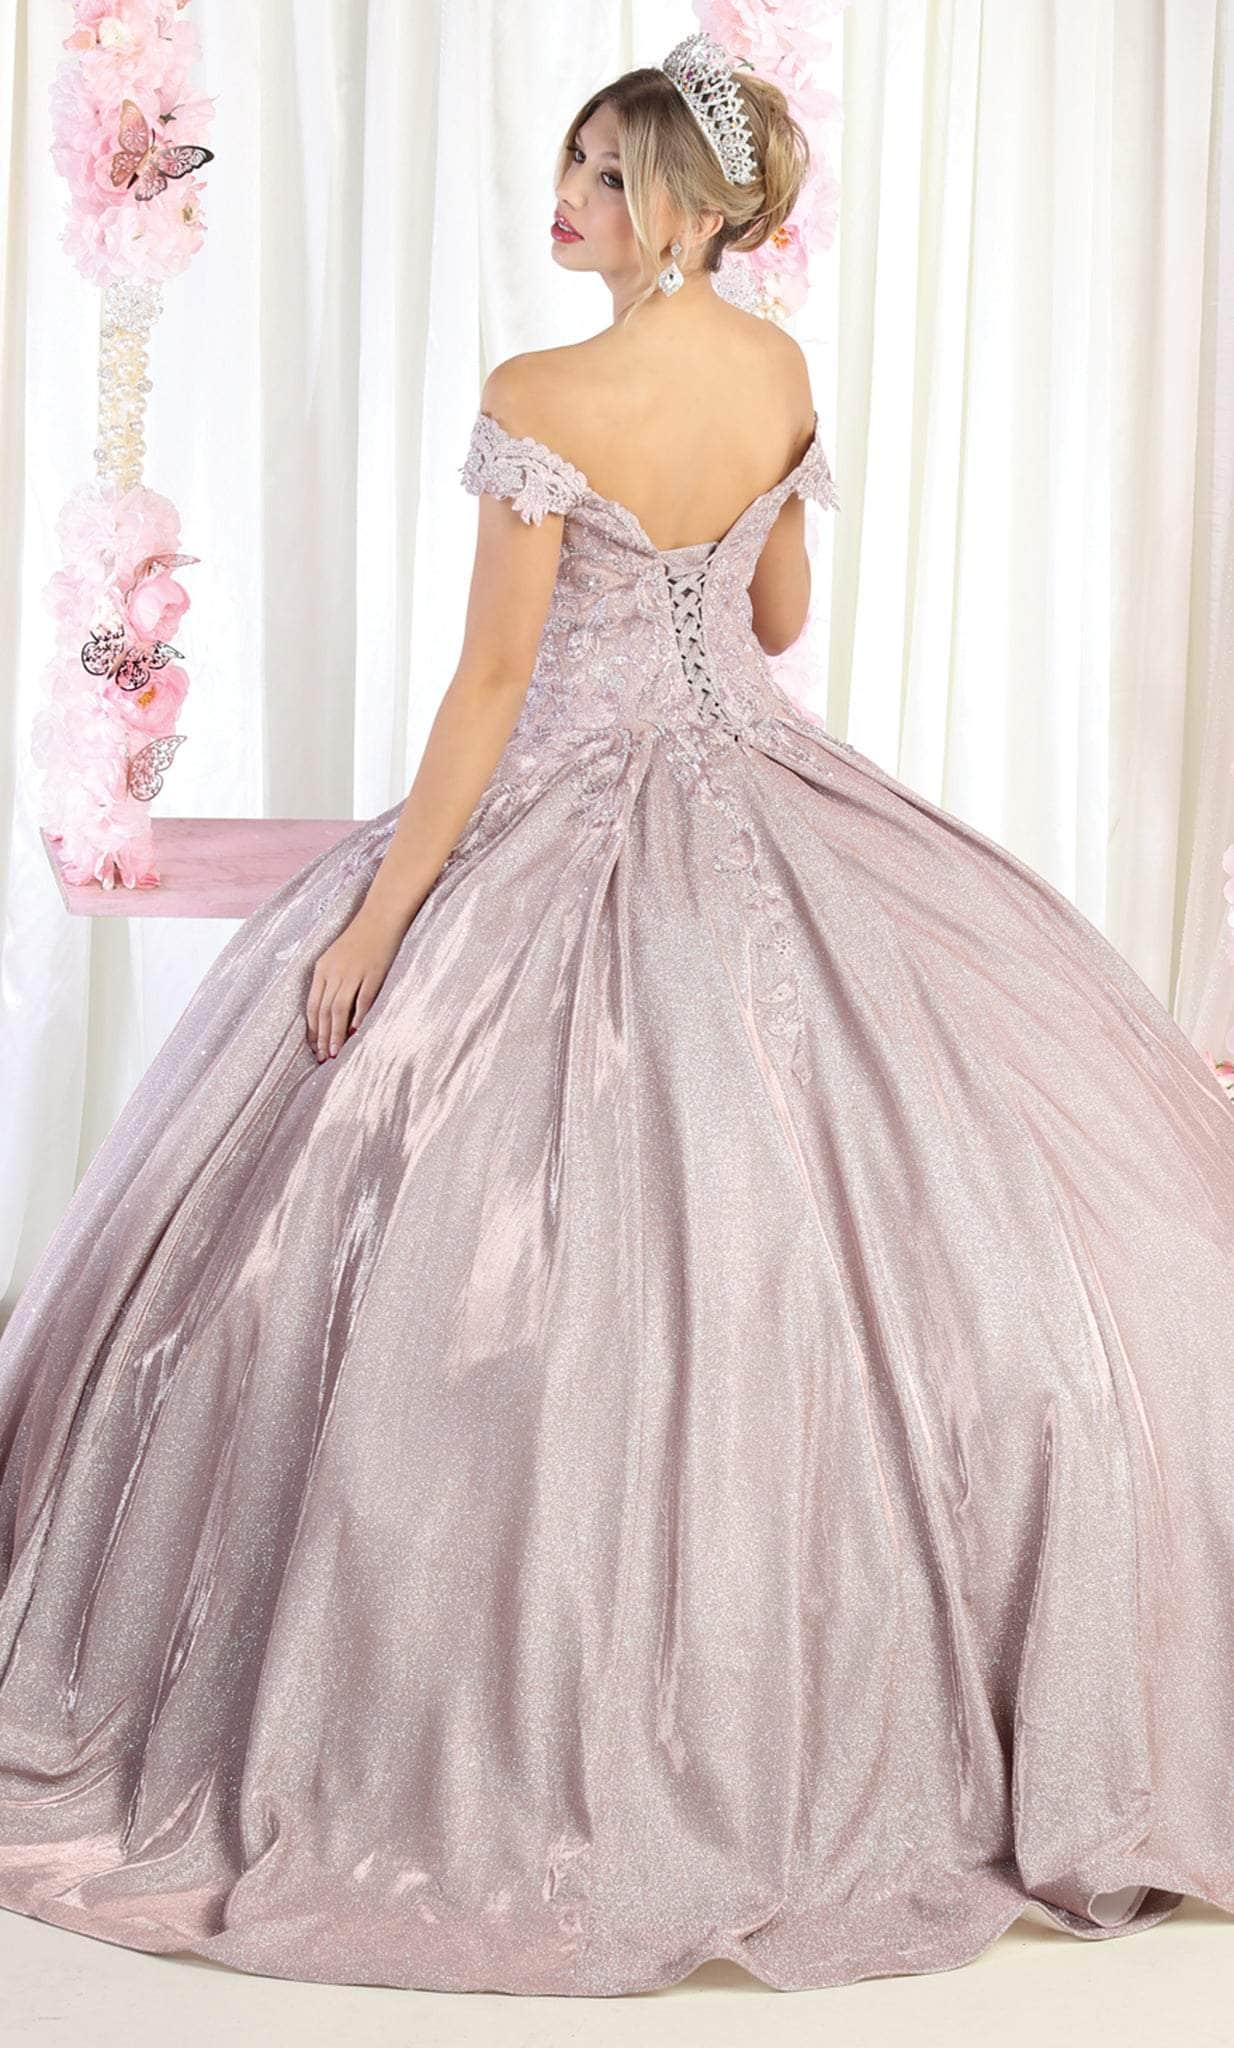 May Queen LK178 - Lace Detailed Quinceanera Ballgown Quinceanera Dresses